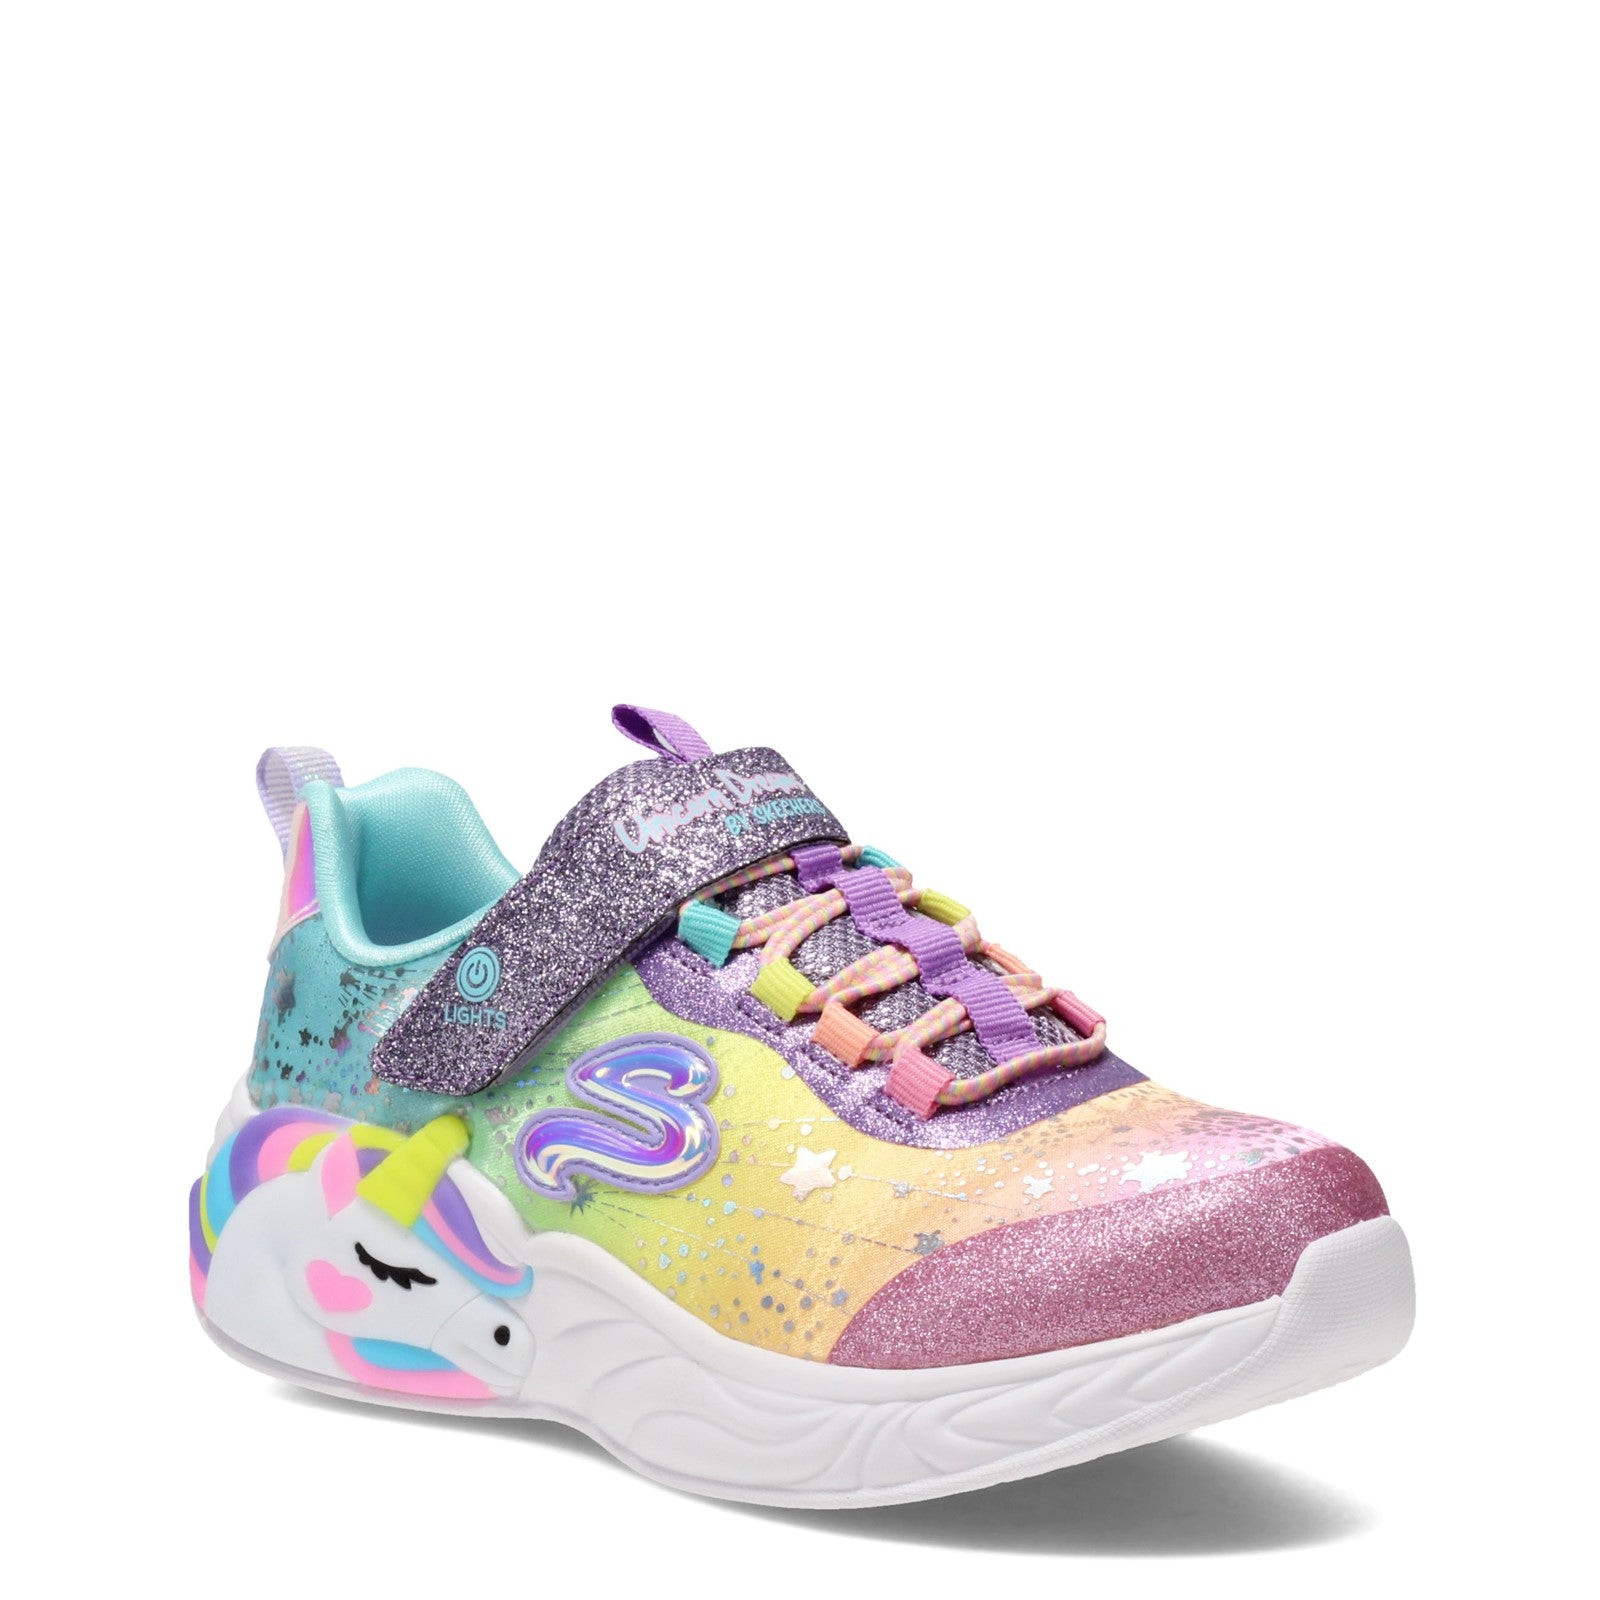 Buy Skechers Kids GALAXY LIGHTS Multicolored Casual Sneakers for Girls at  Best Price @ Tata CLiQ